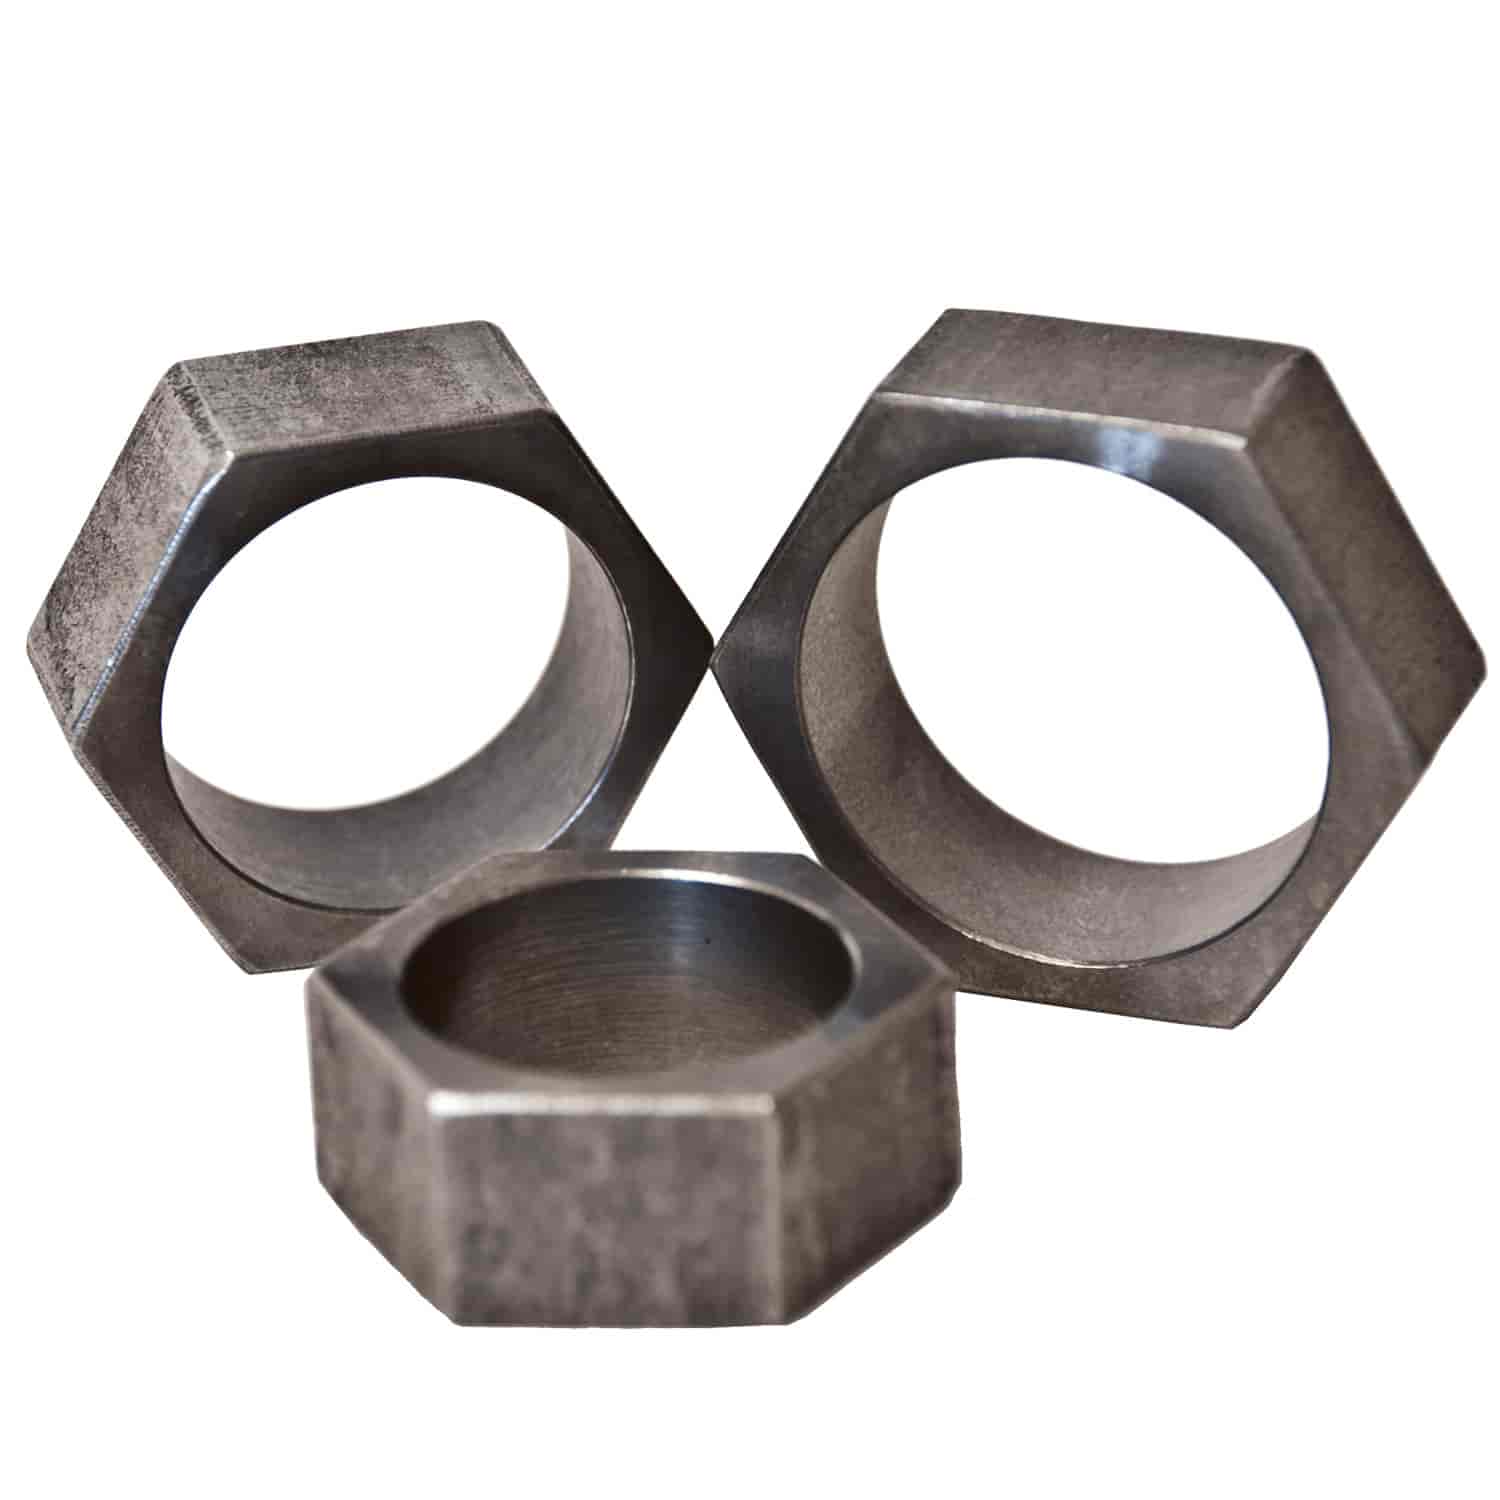 Weld On Wrench Hex For 1-1/4" OD Tubing